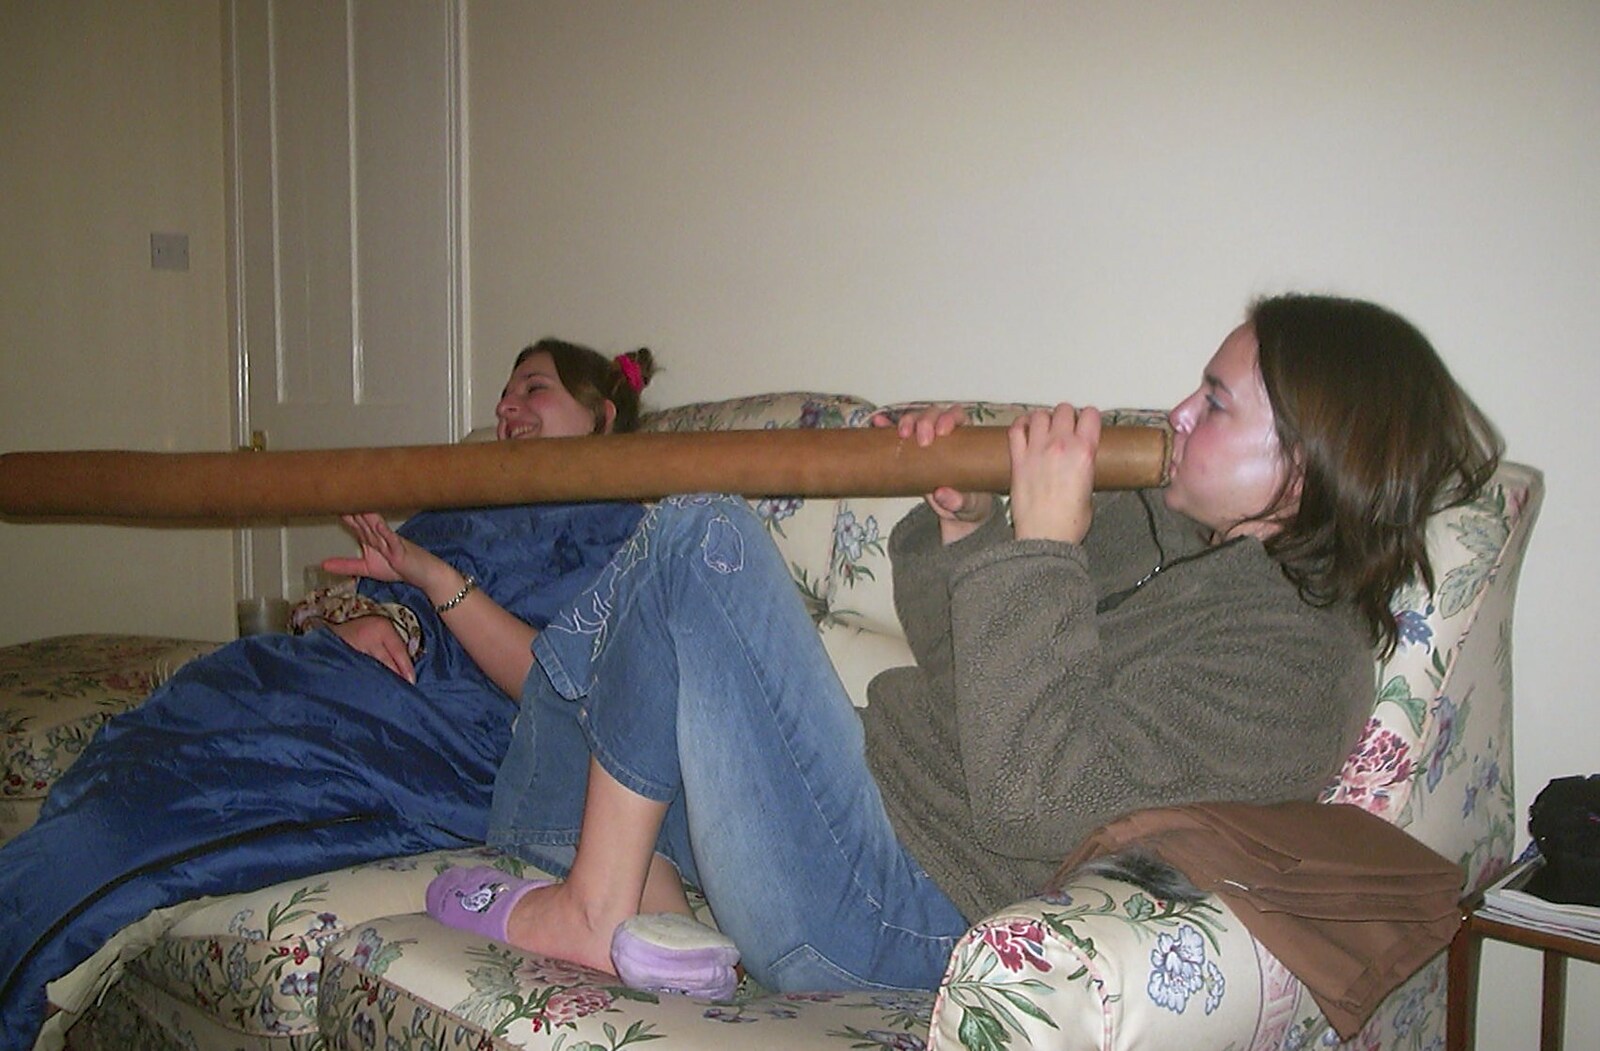 Jen tries a didgeridoo from A Chinese-themed Murder Mystery, Eye, Suffolk - 7th February 2004